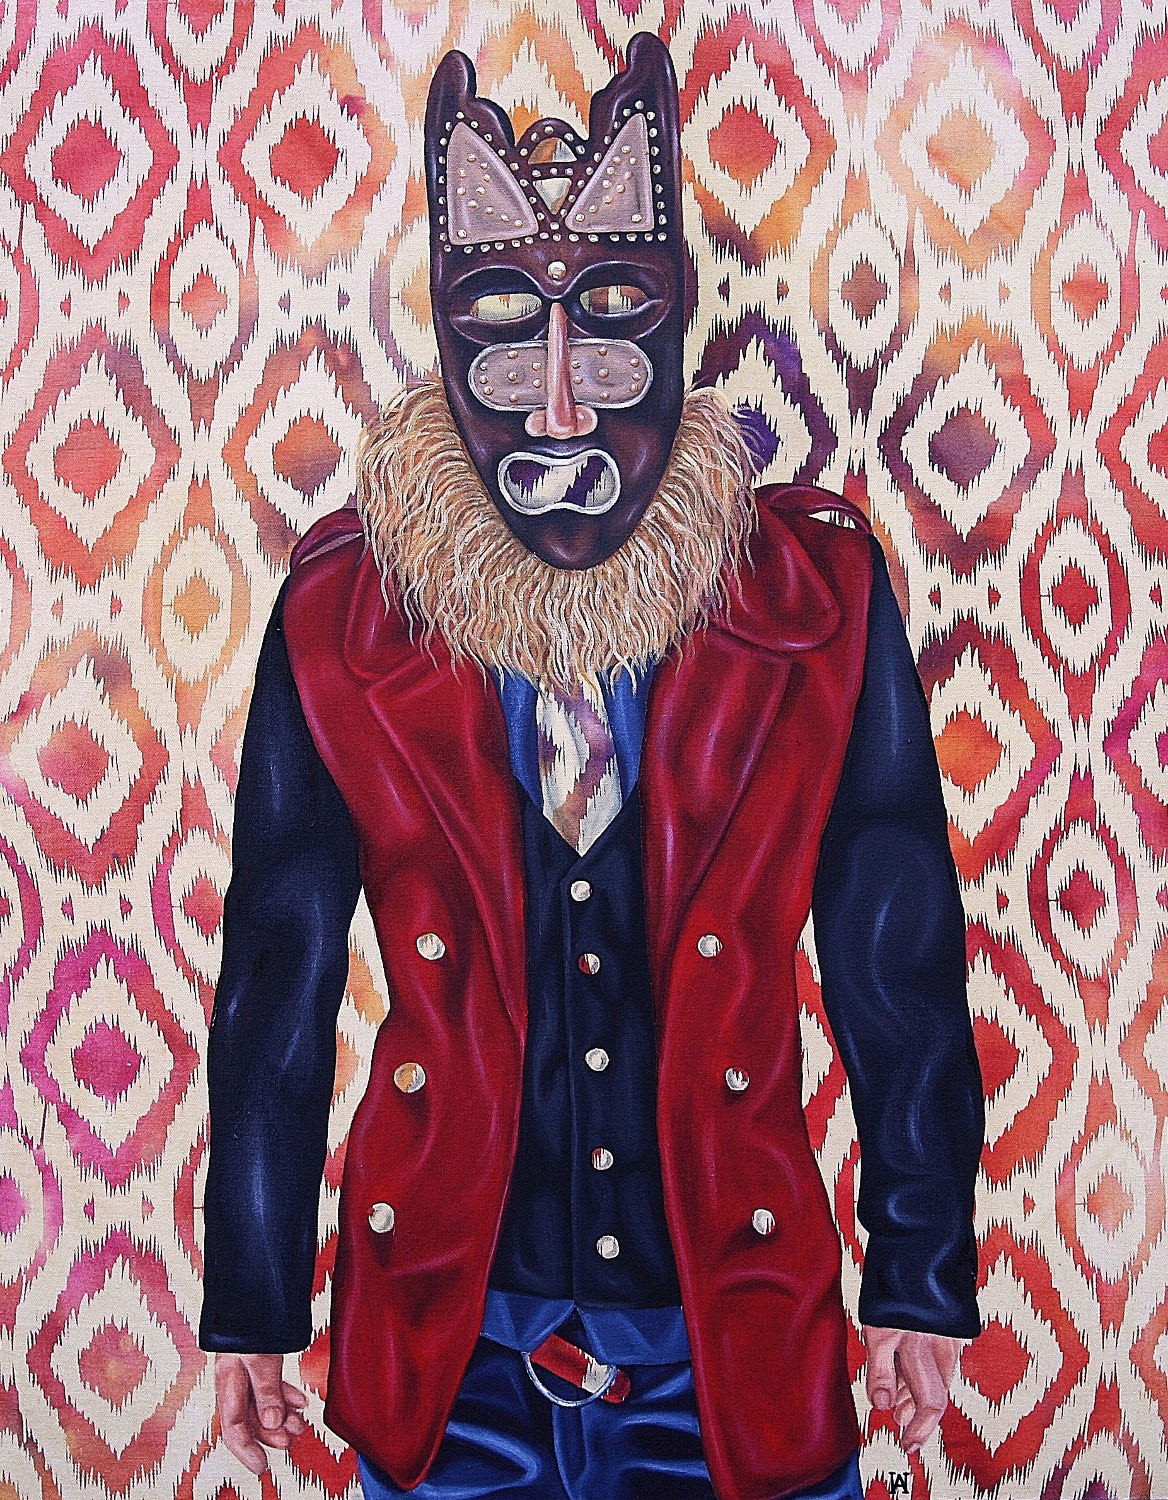 Alea Hurst, The Mover and Shaker, 2014. Oil on fabric, 30 x 24 in.